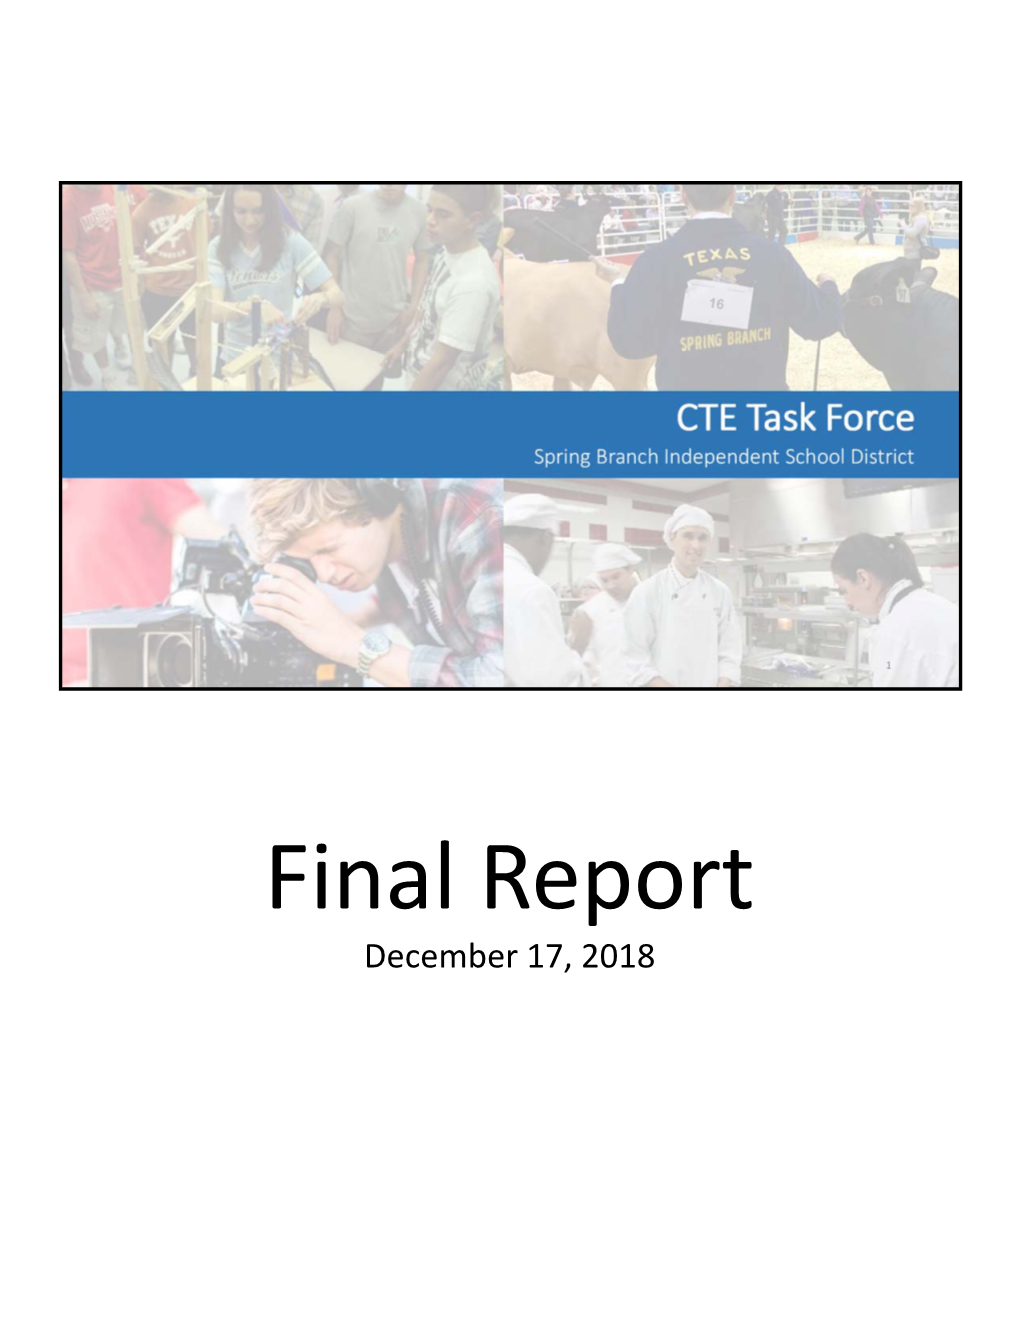 Final Report December 17, 2018 CAREER and TECHNICAL EDUCATION TASK FORCE Executive Summary